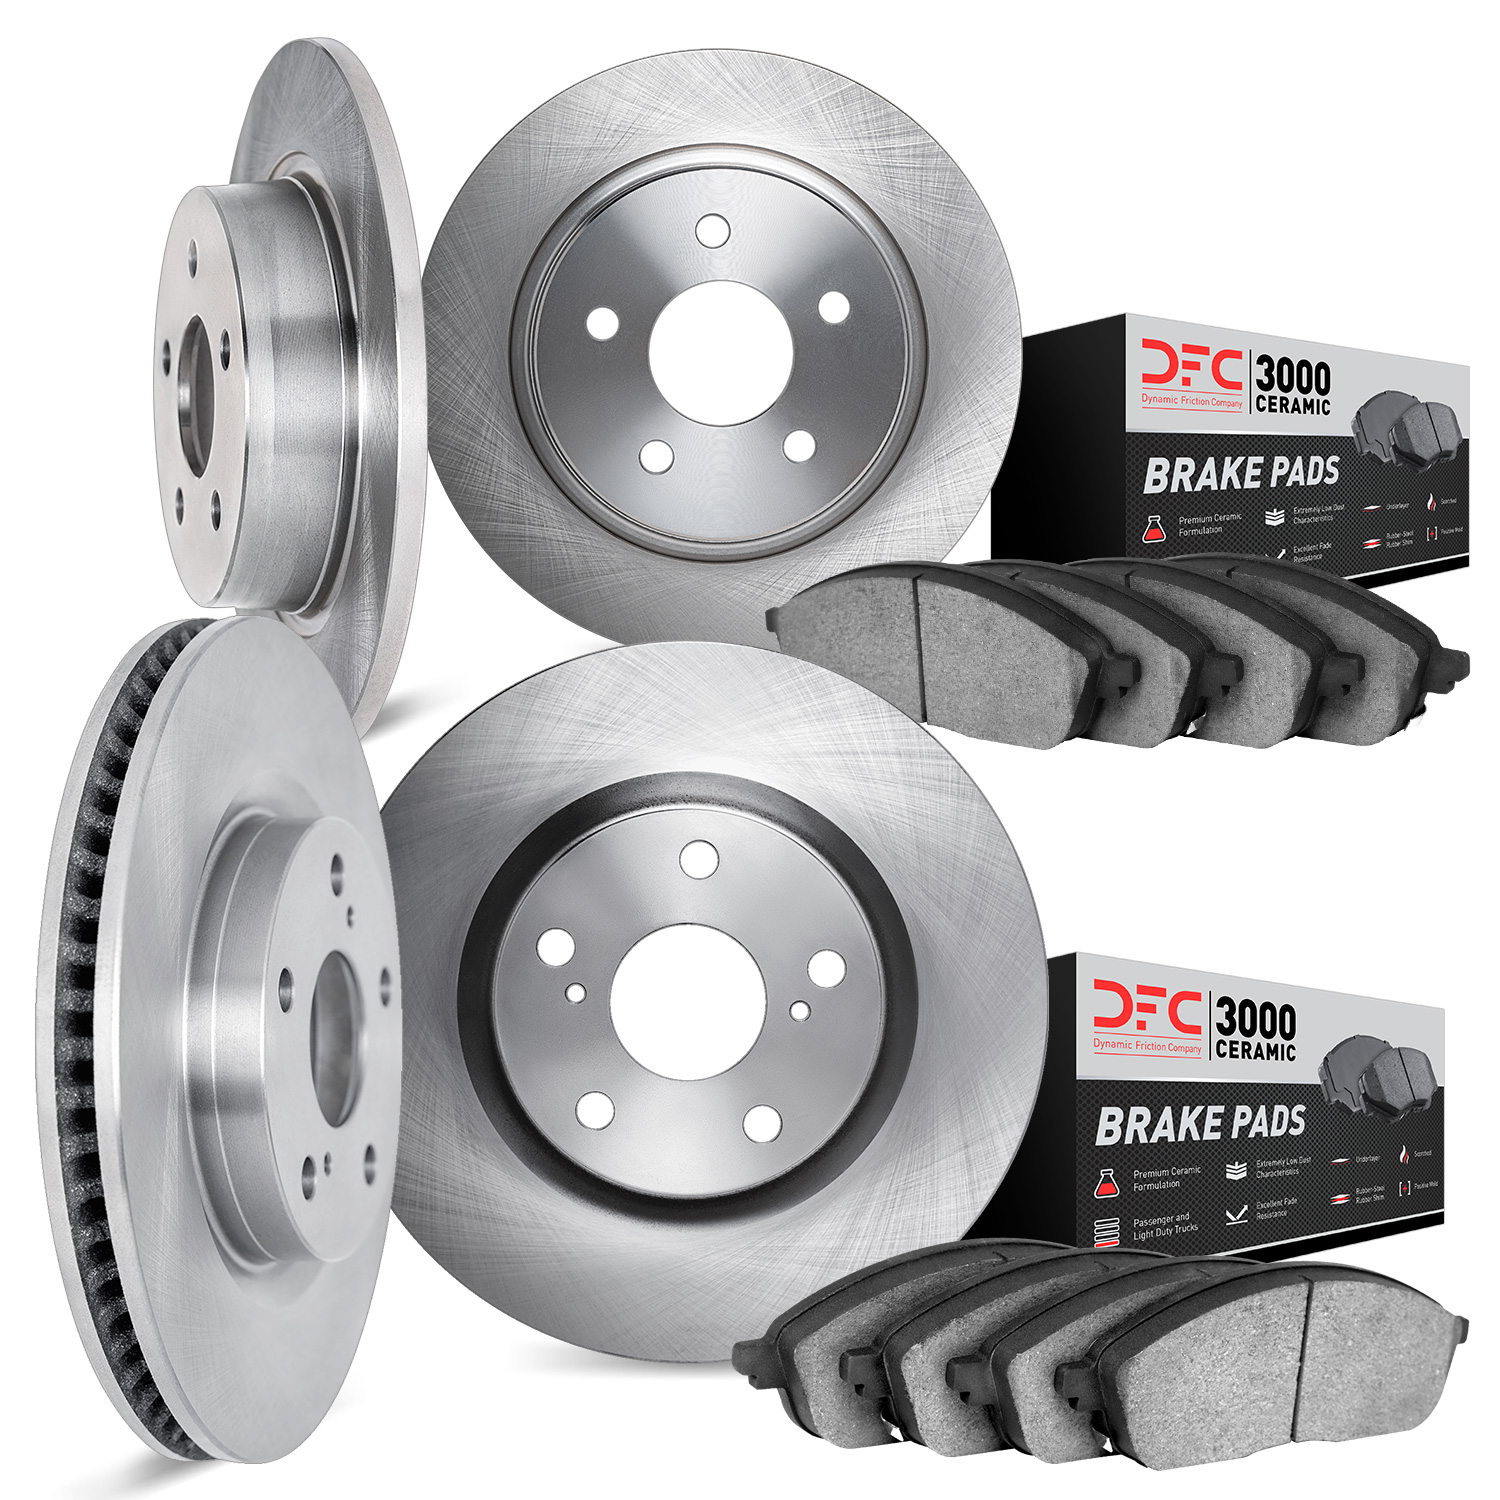 6304-76054 Brake Rotors with 3000-Series Ceramic Brake Pads Kit, 2004-2008 Lexus/Toyota/Scion, Position: Front and Rear